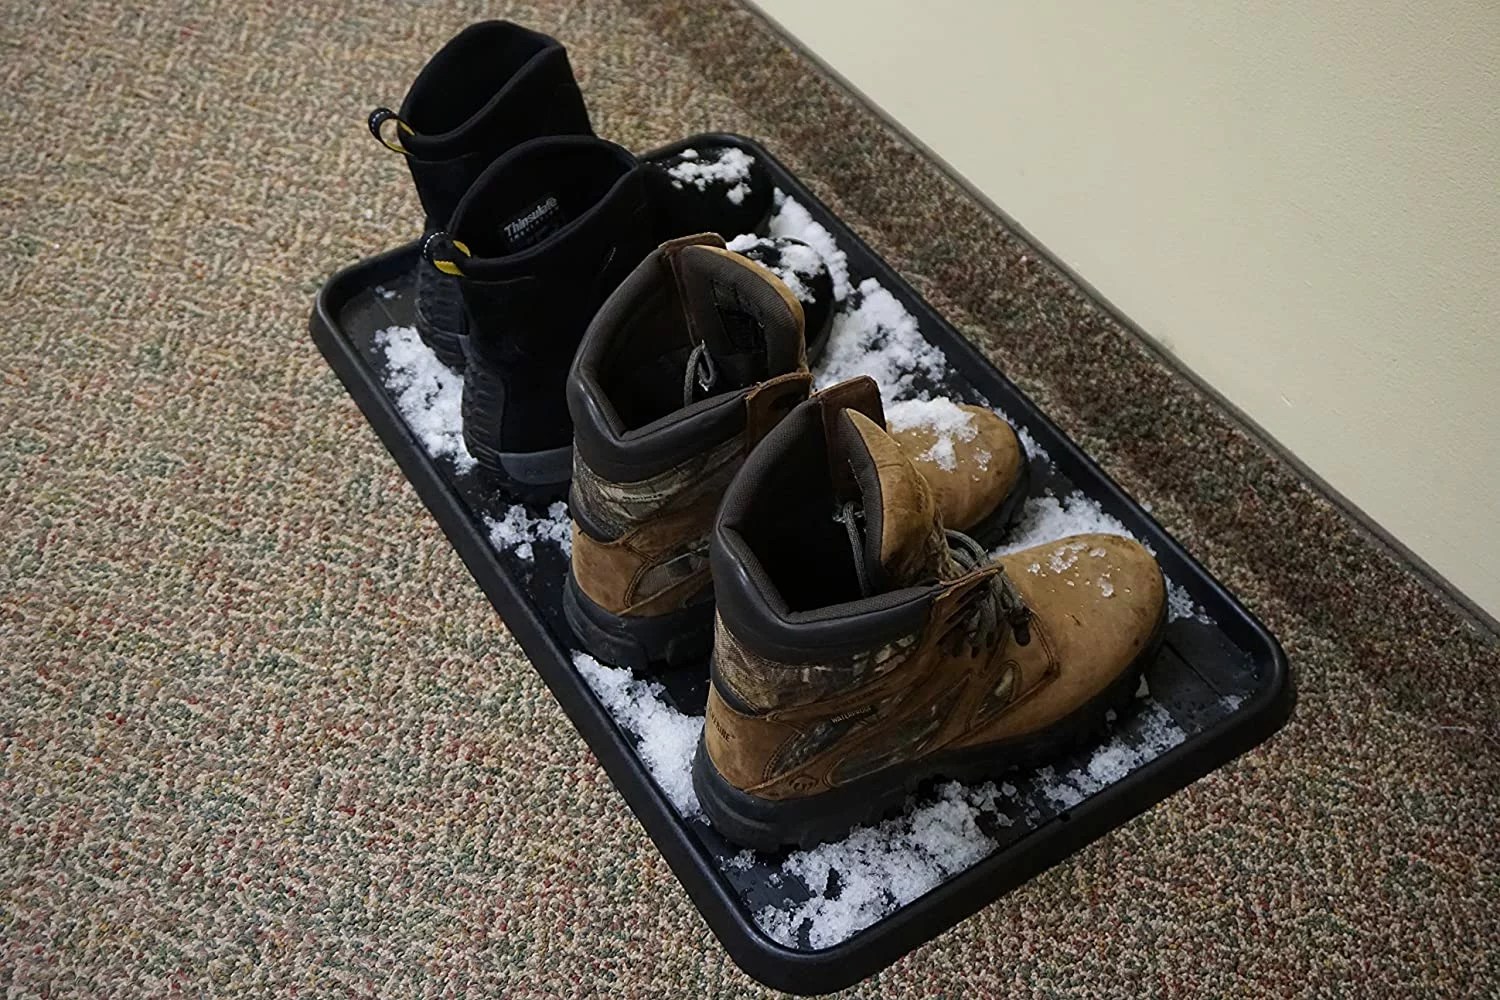 Tray Boots Shoes, Drip Tray Shoes, Boot Drip Tray